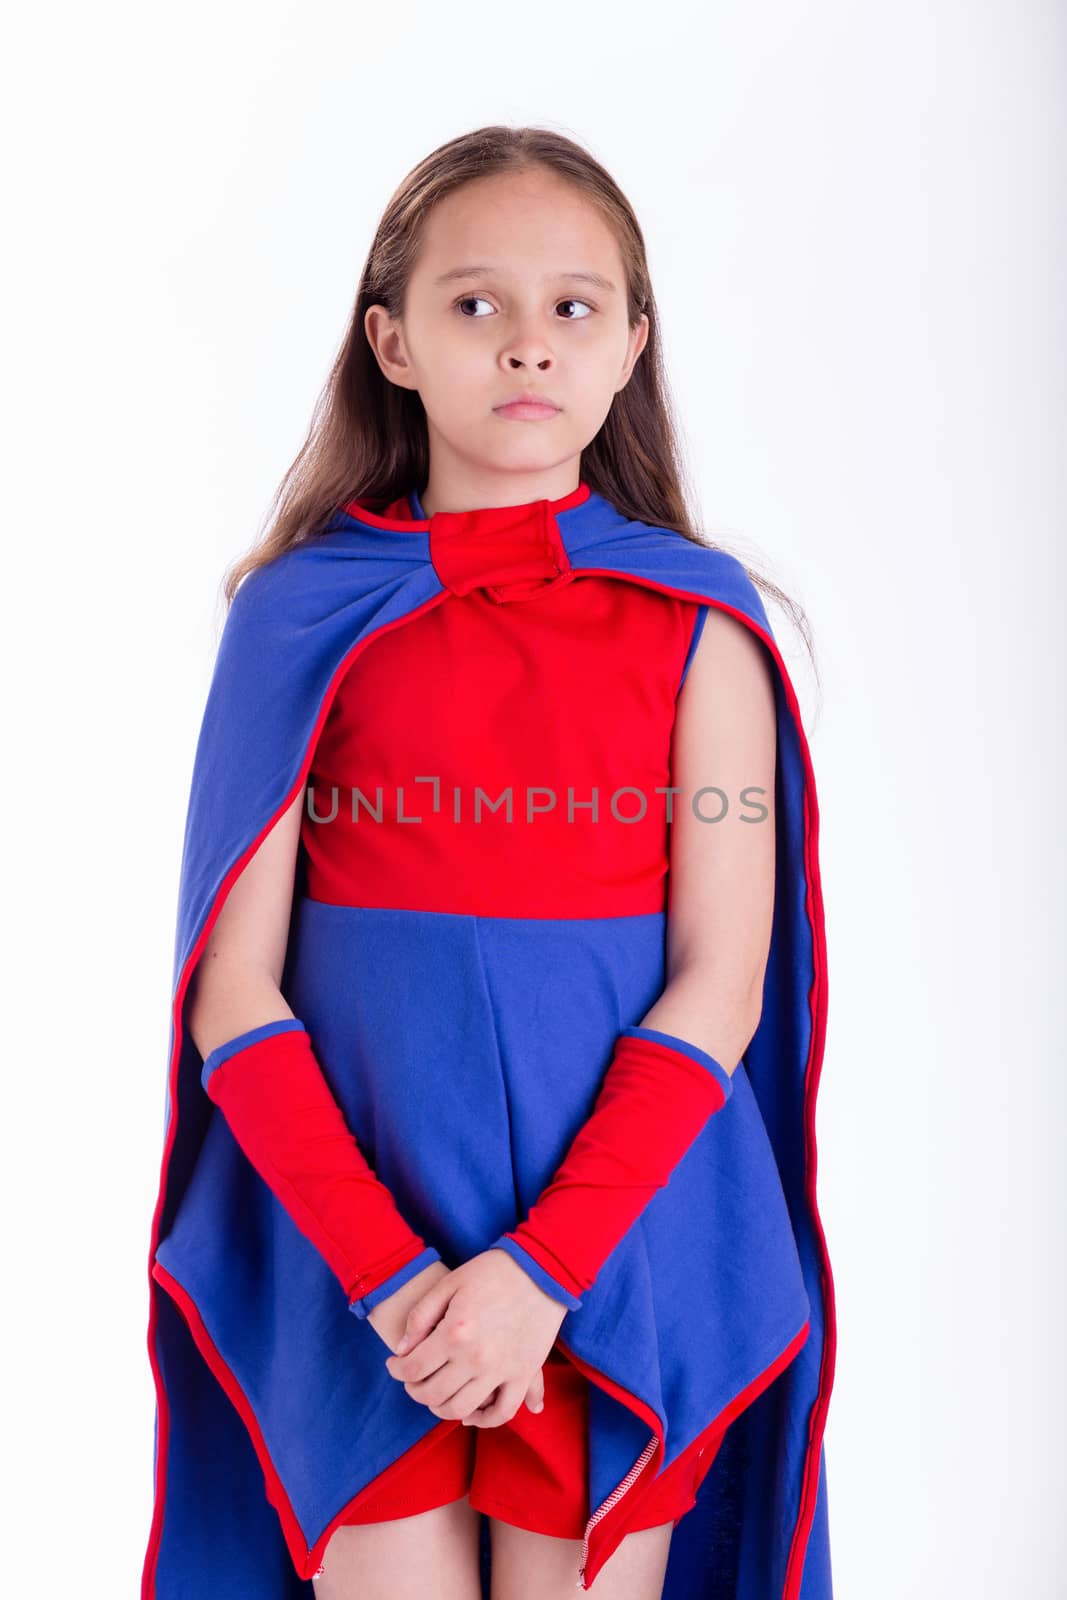 Girl in blue and red superhero costume with worried look